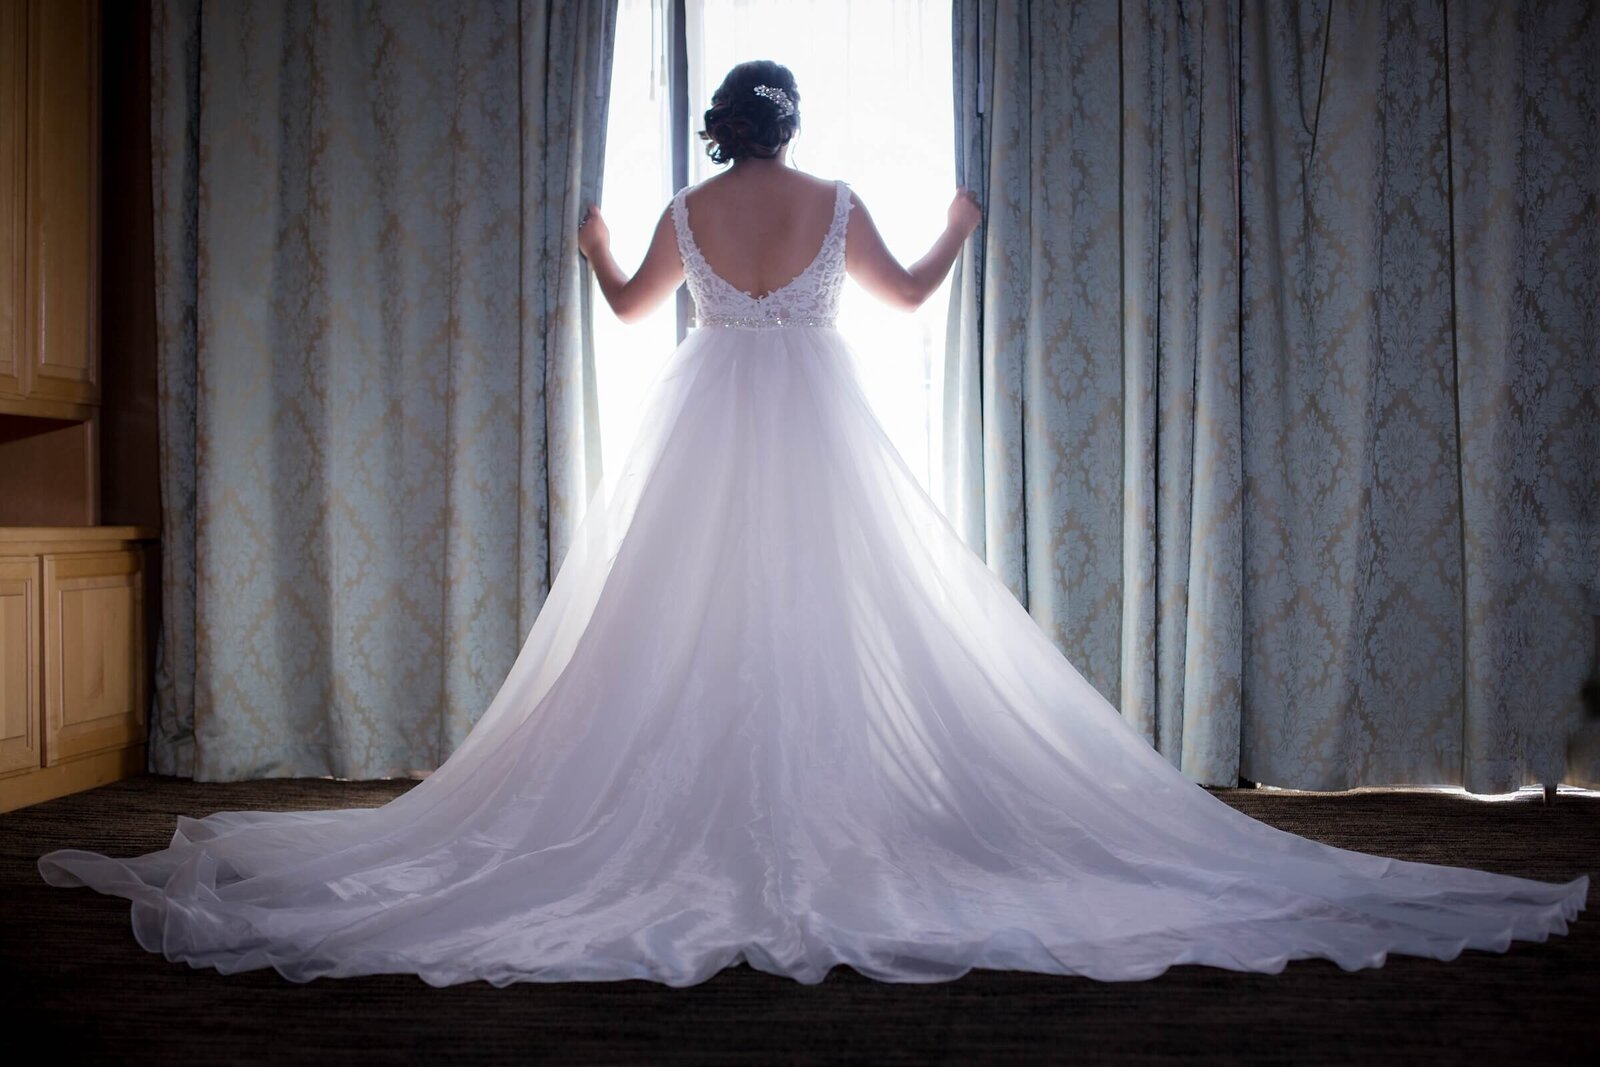 Bride pushes away curtains to look outside with large train of dress spread out behind her.  Photo taken by Philippe Studio Pro, Sacramento wedding photography studio.